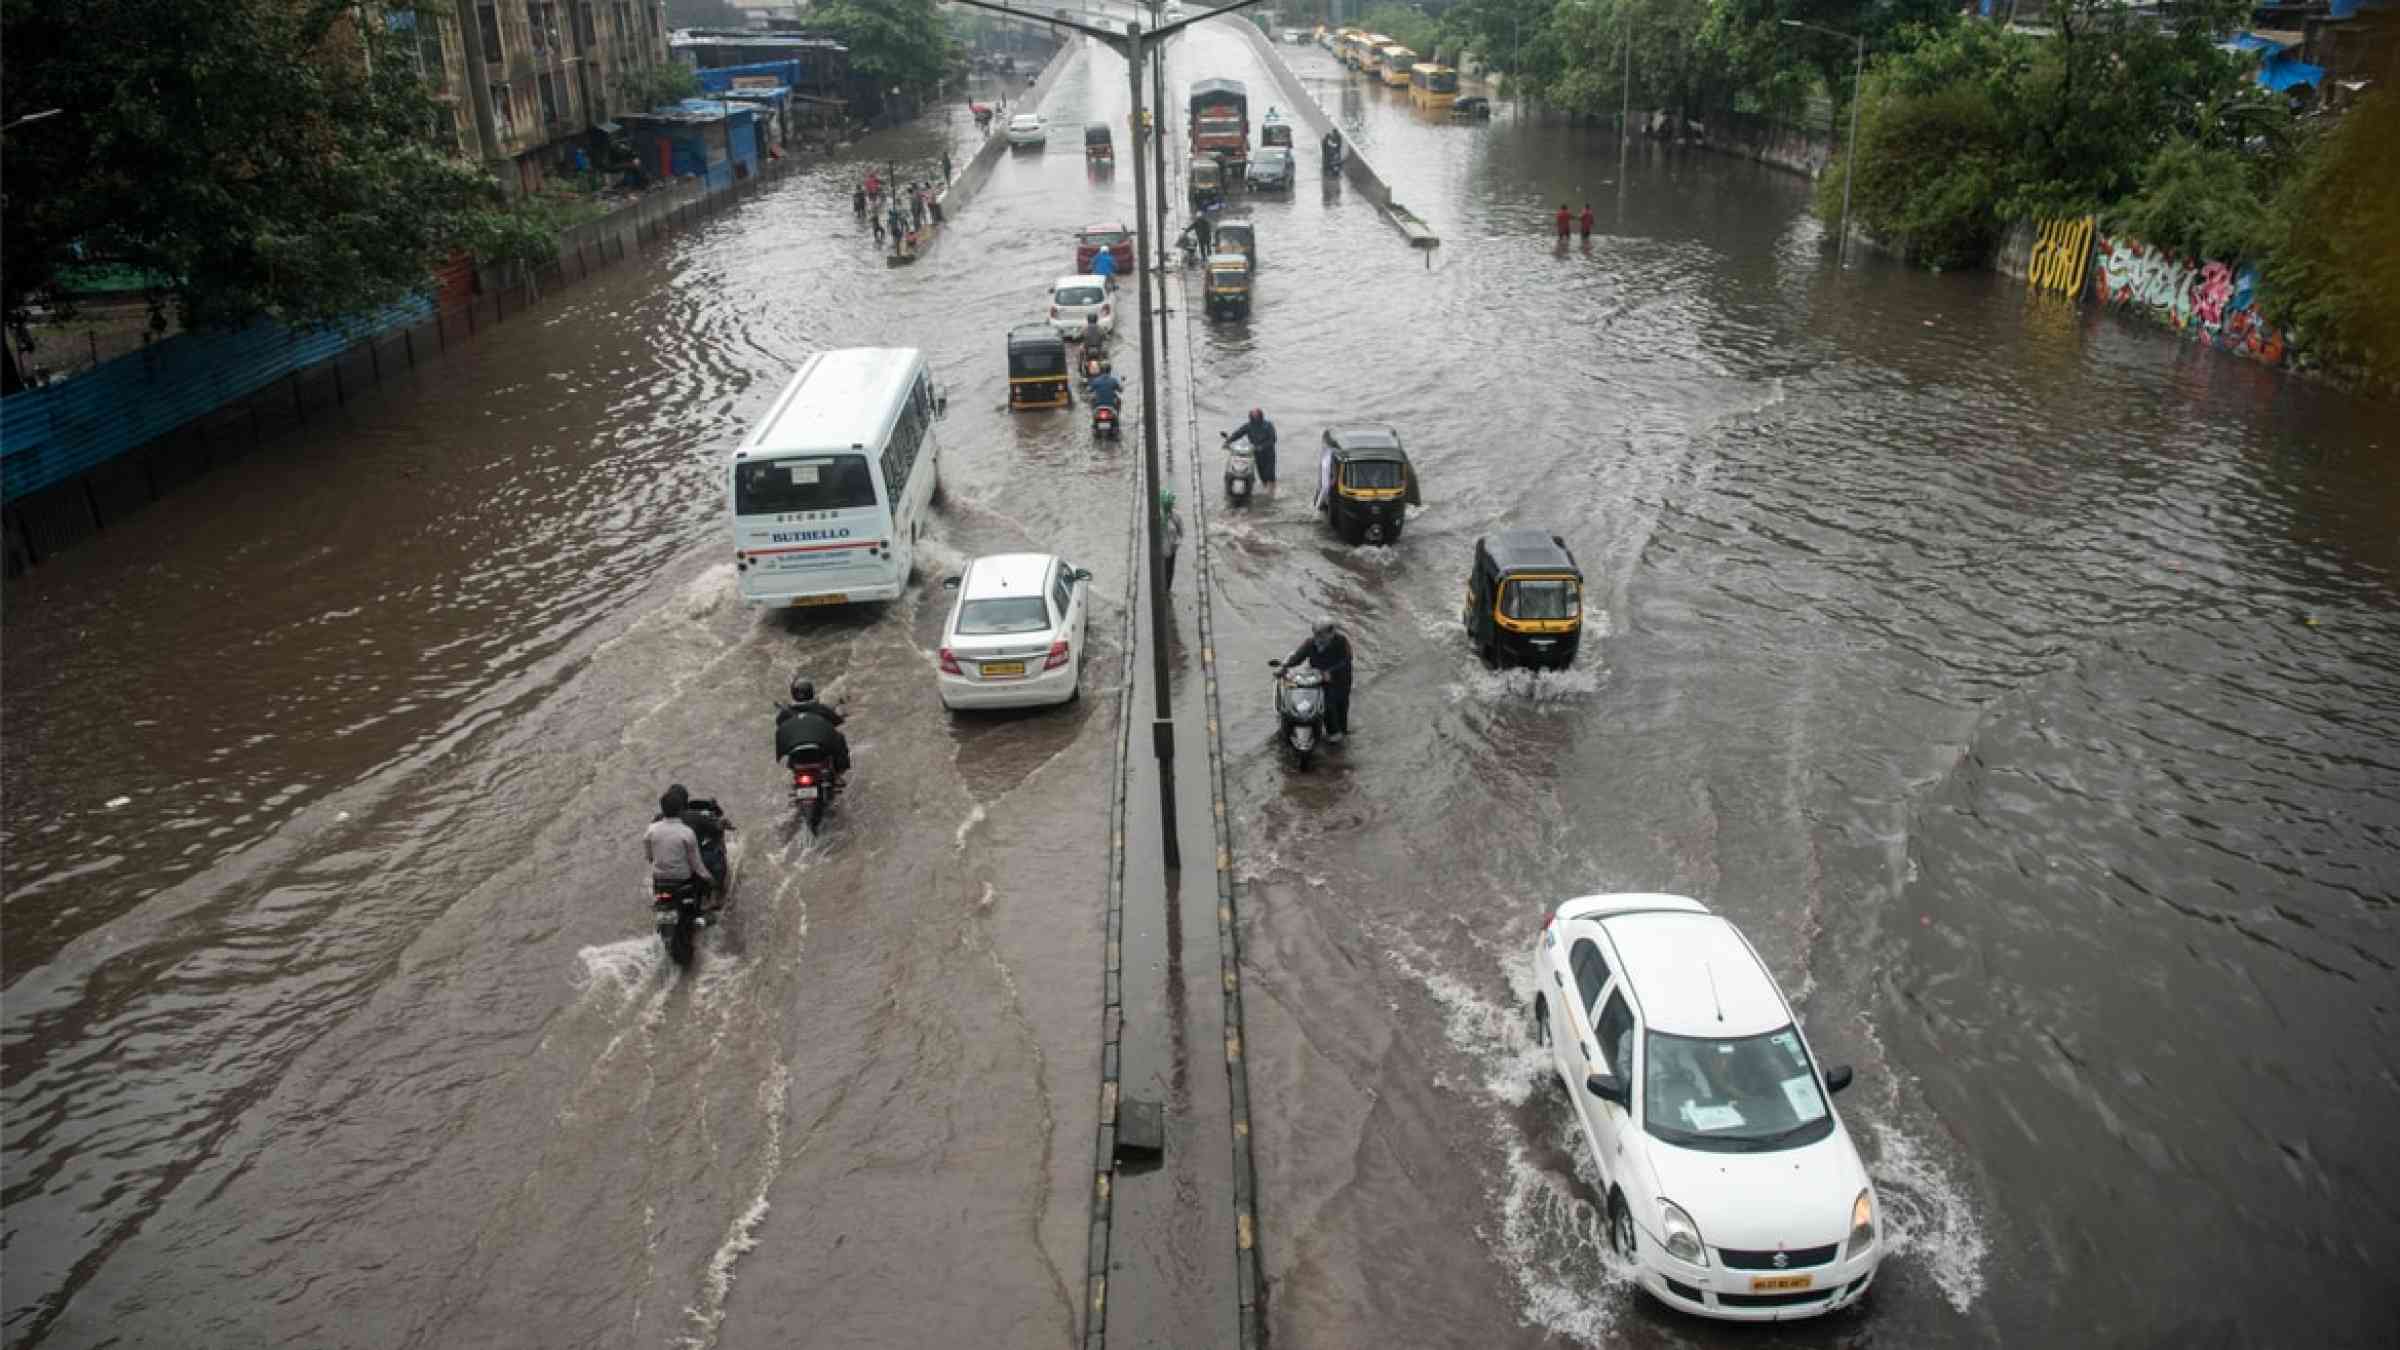 Commuters drive through a flooded street during heavy rains in Mumbai, India (2020)